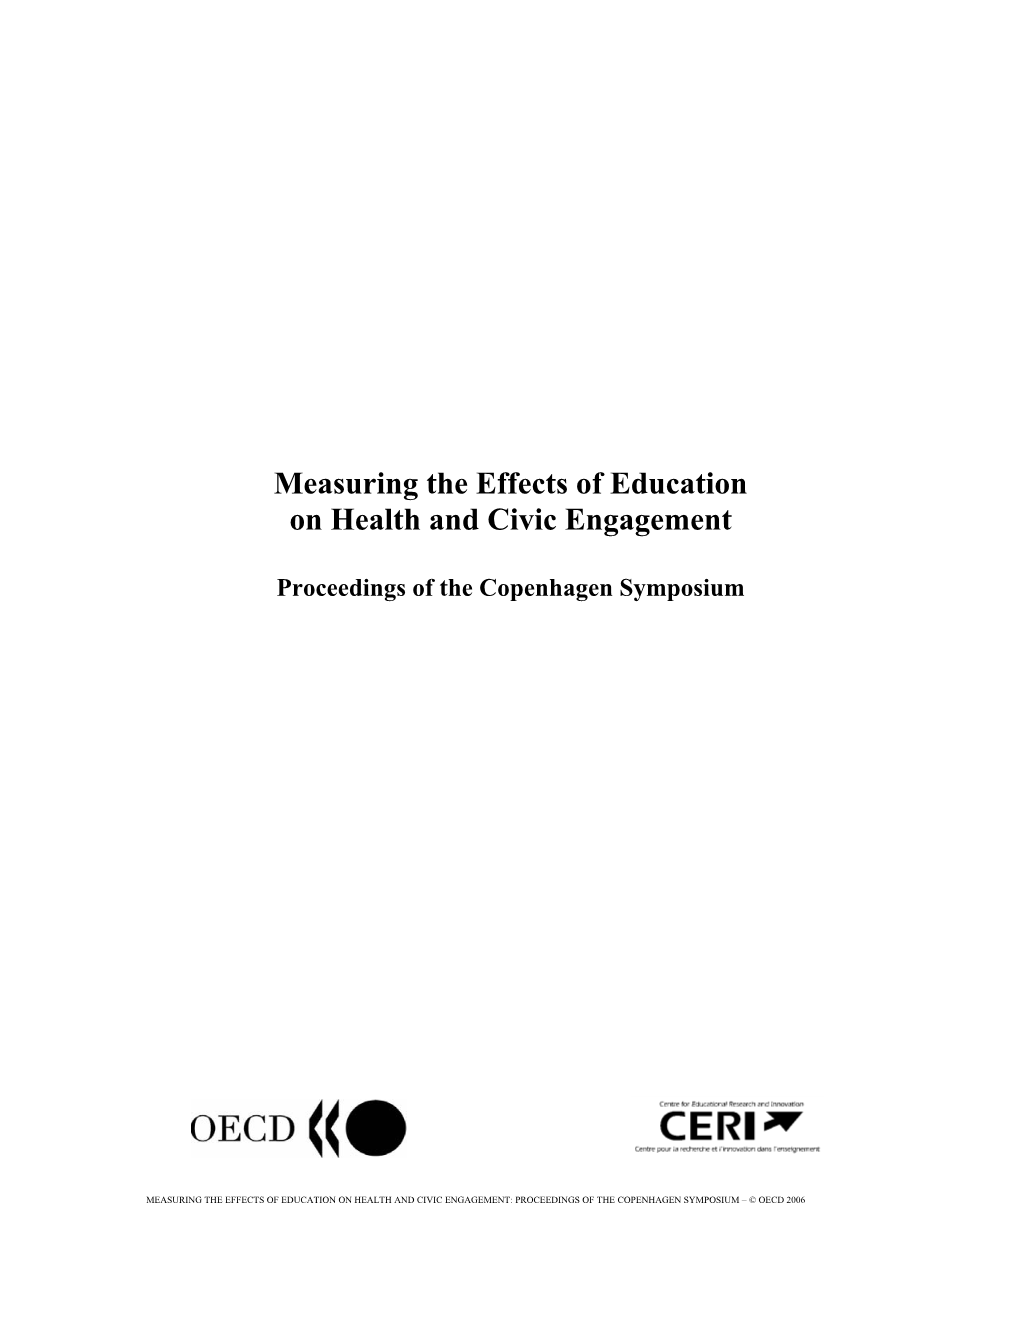 Measuring the Effects of Education on Health and Civic Engagement